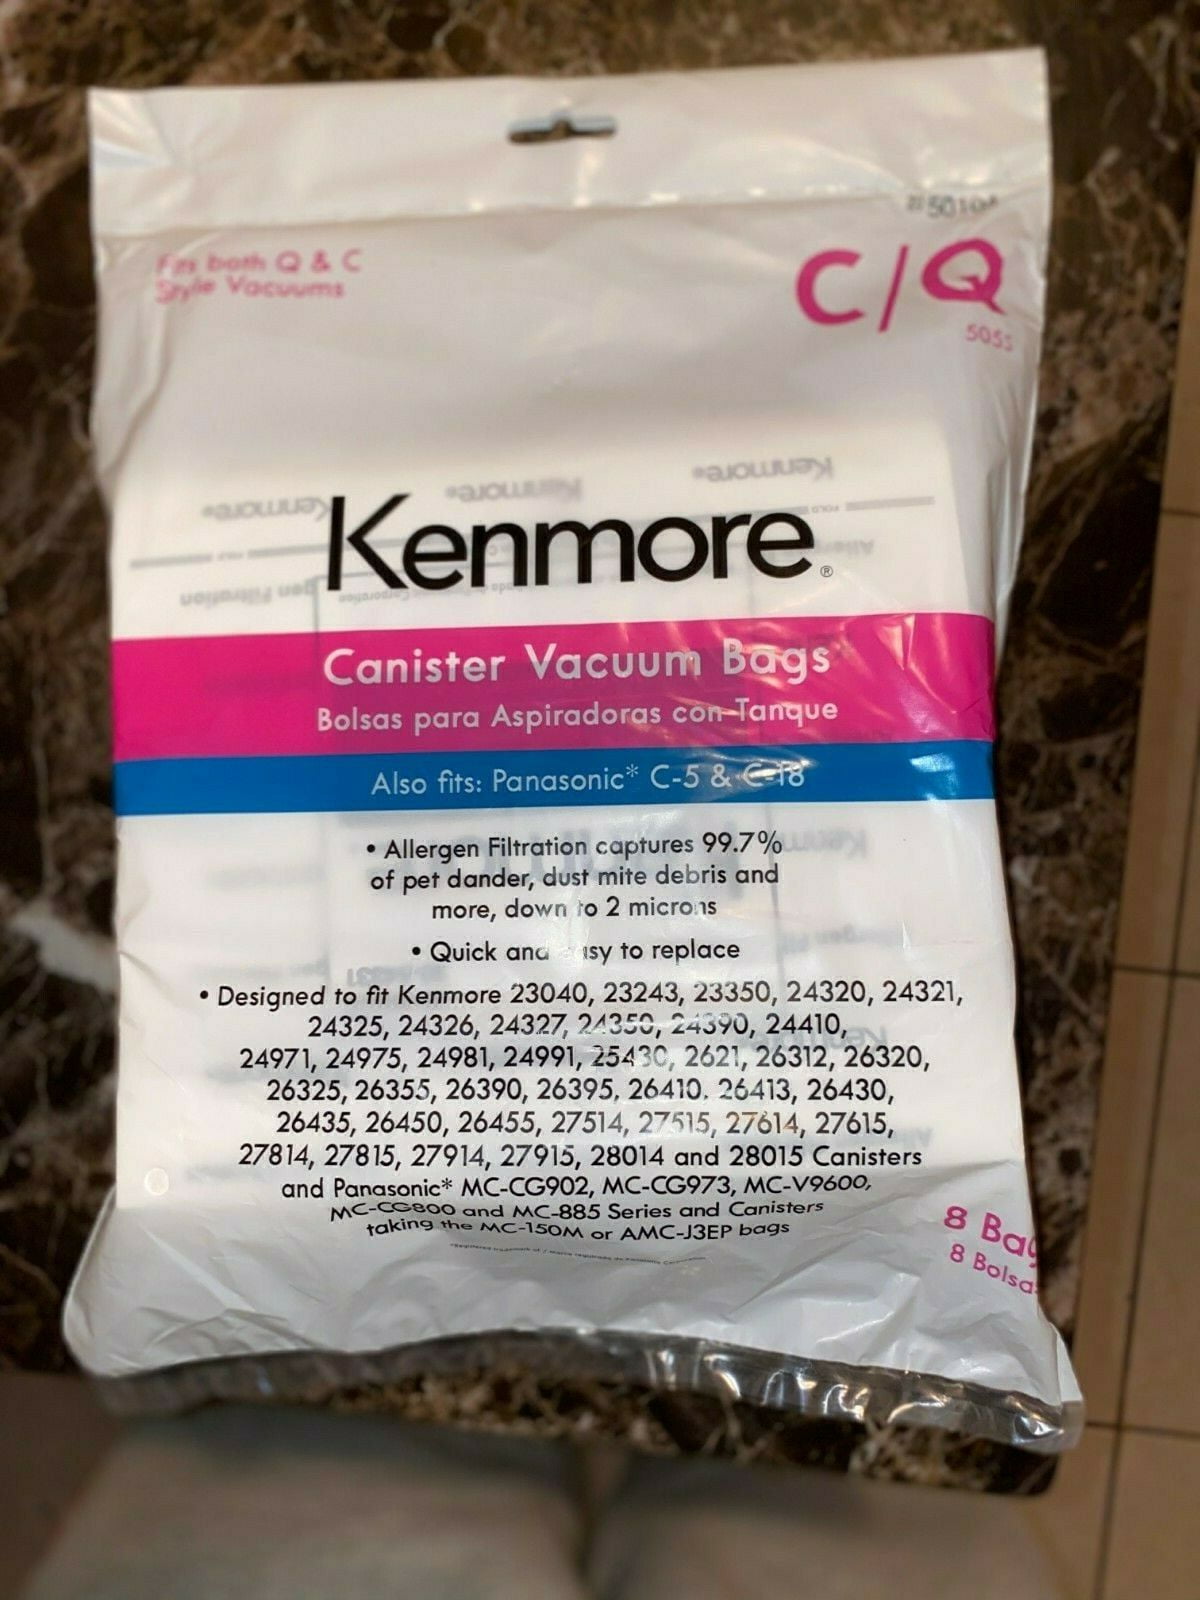 Kenmore Canister Vacuum 2pcs Filter Bags Fit Q&C Style #53291--free Shipping! 